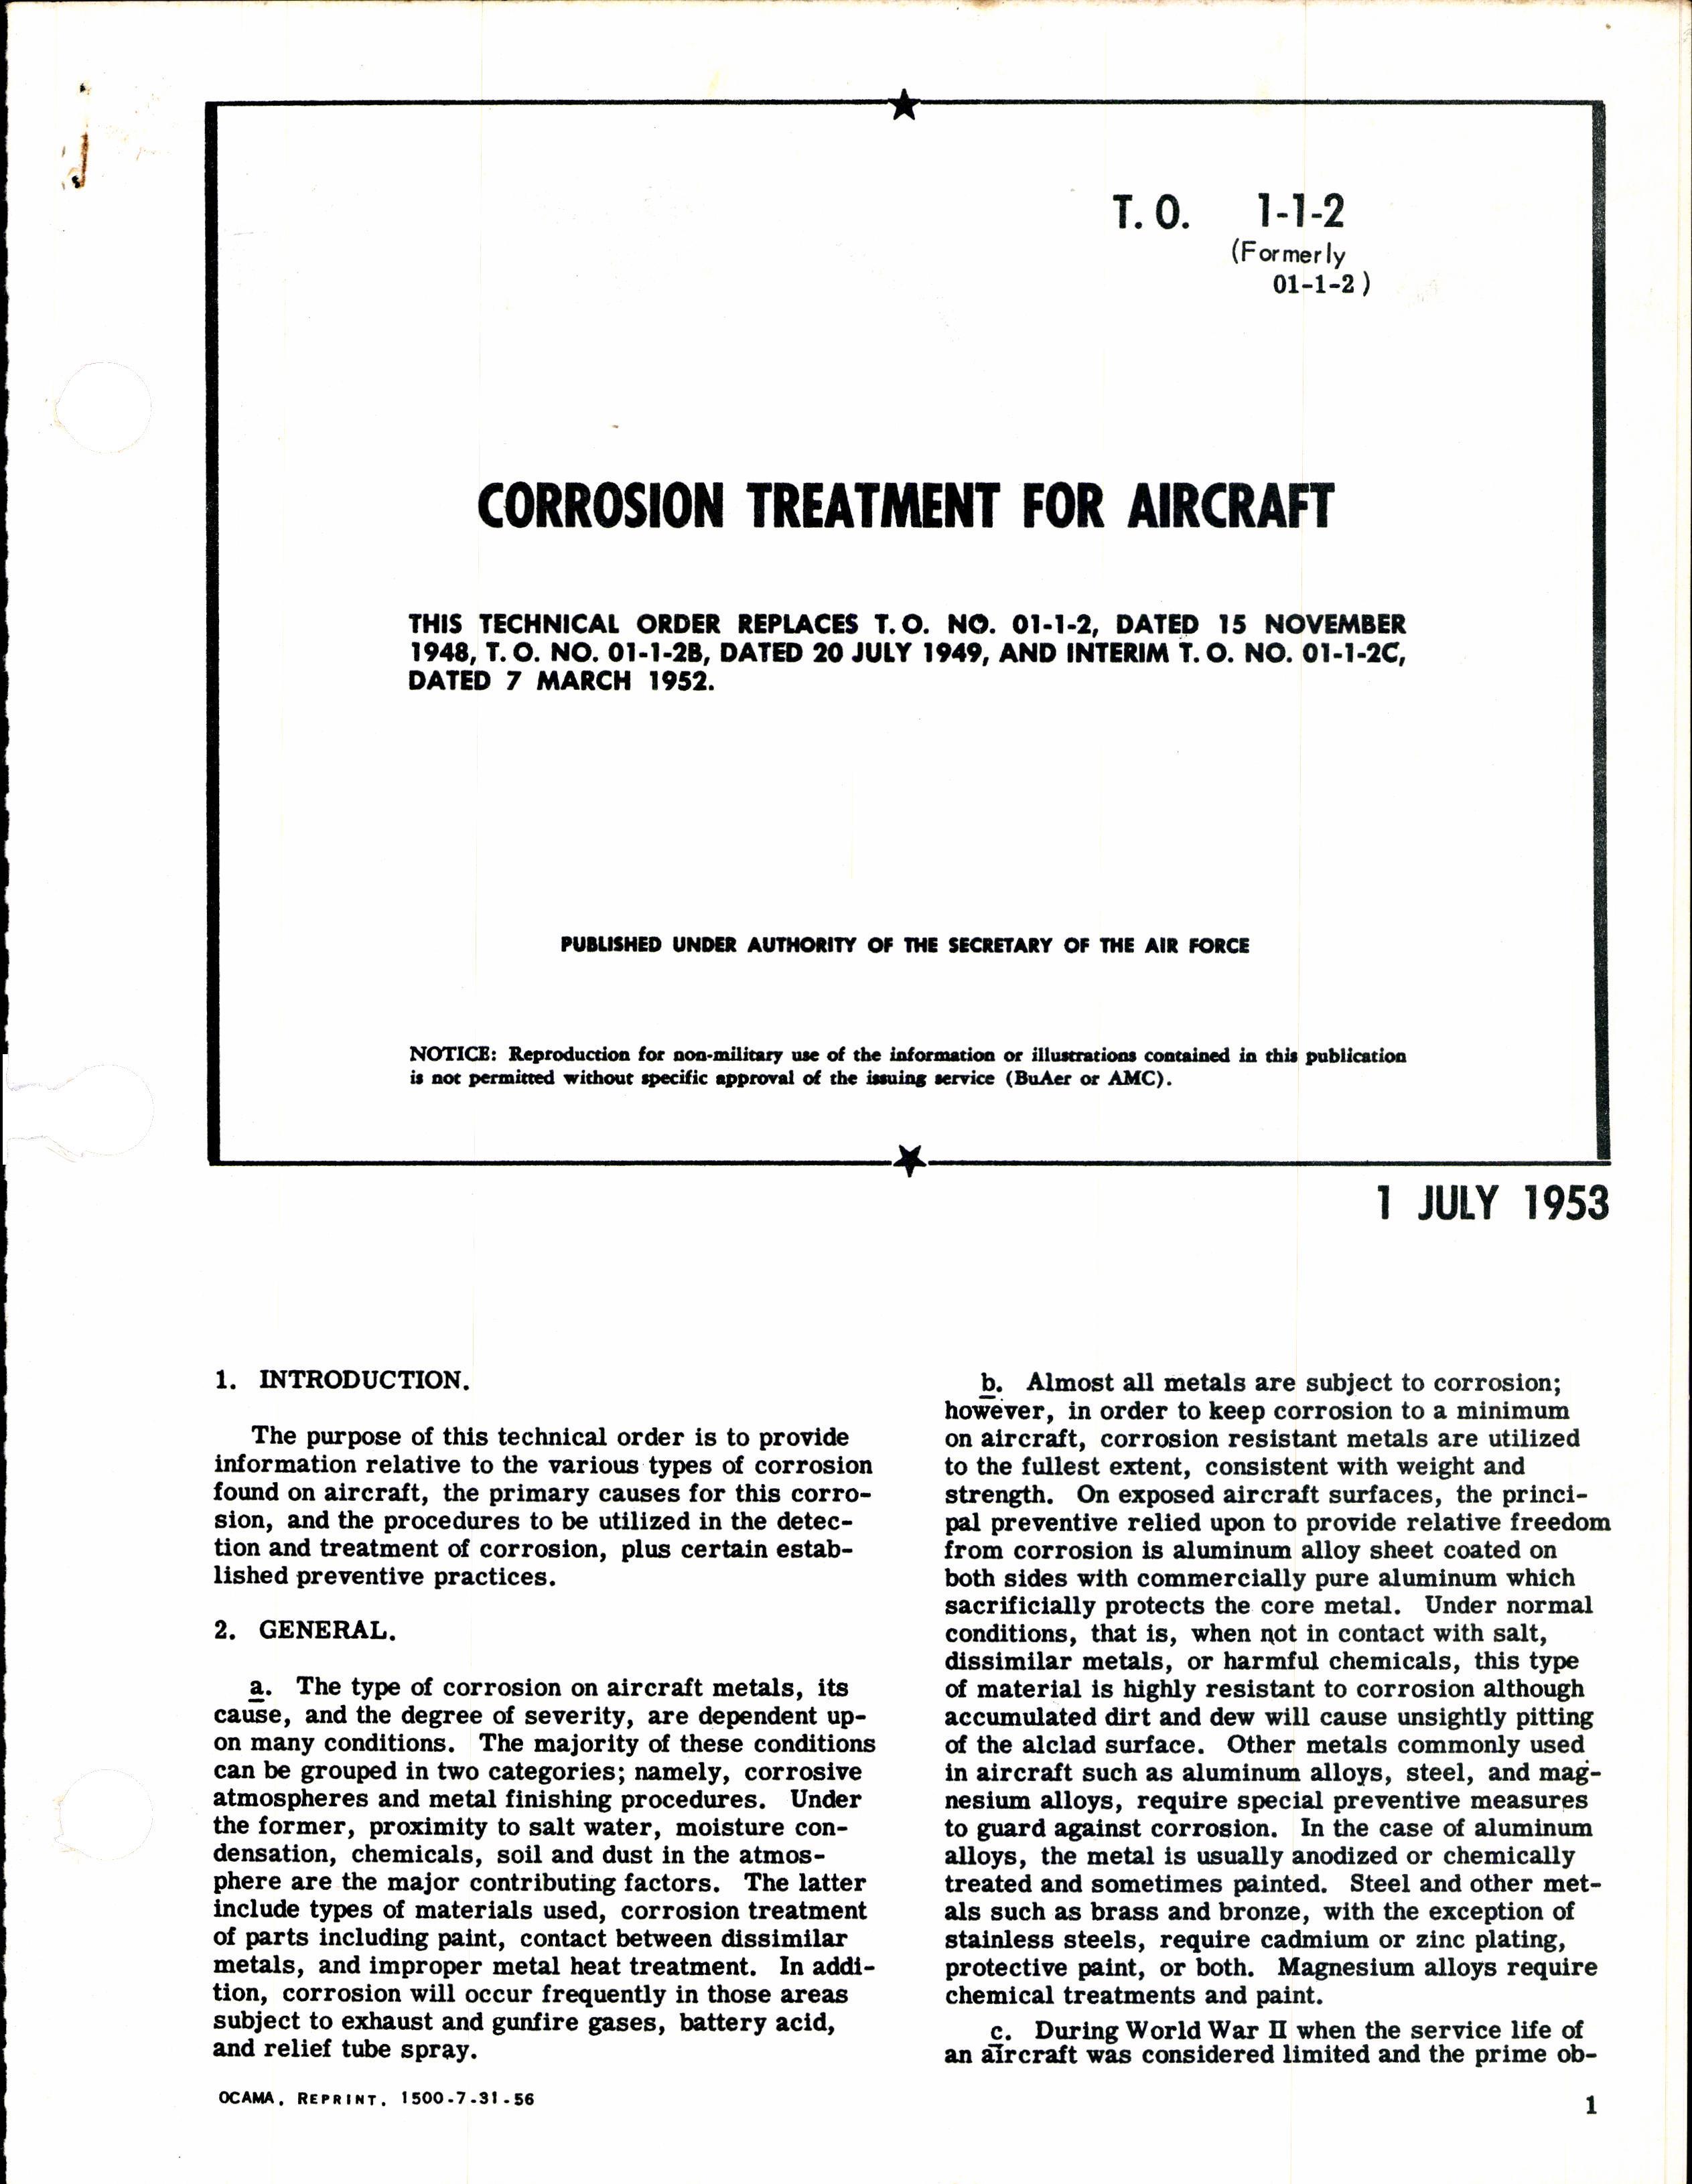 Sample page 1 from AirCorps Library document: Corrosion Treatment for Aircraft